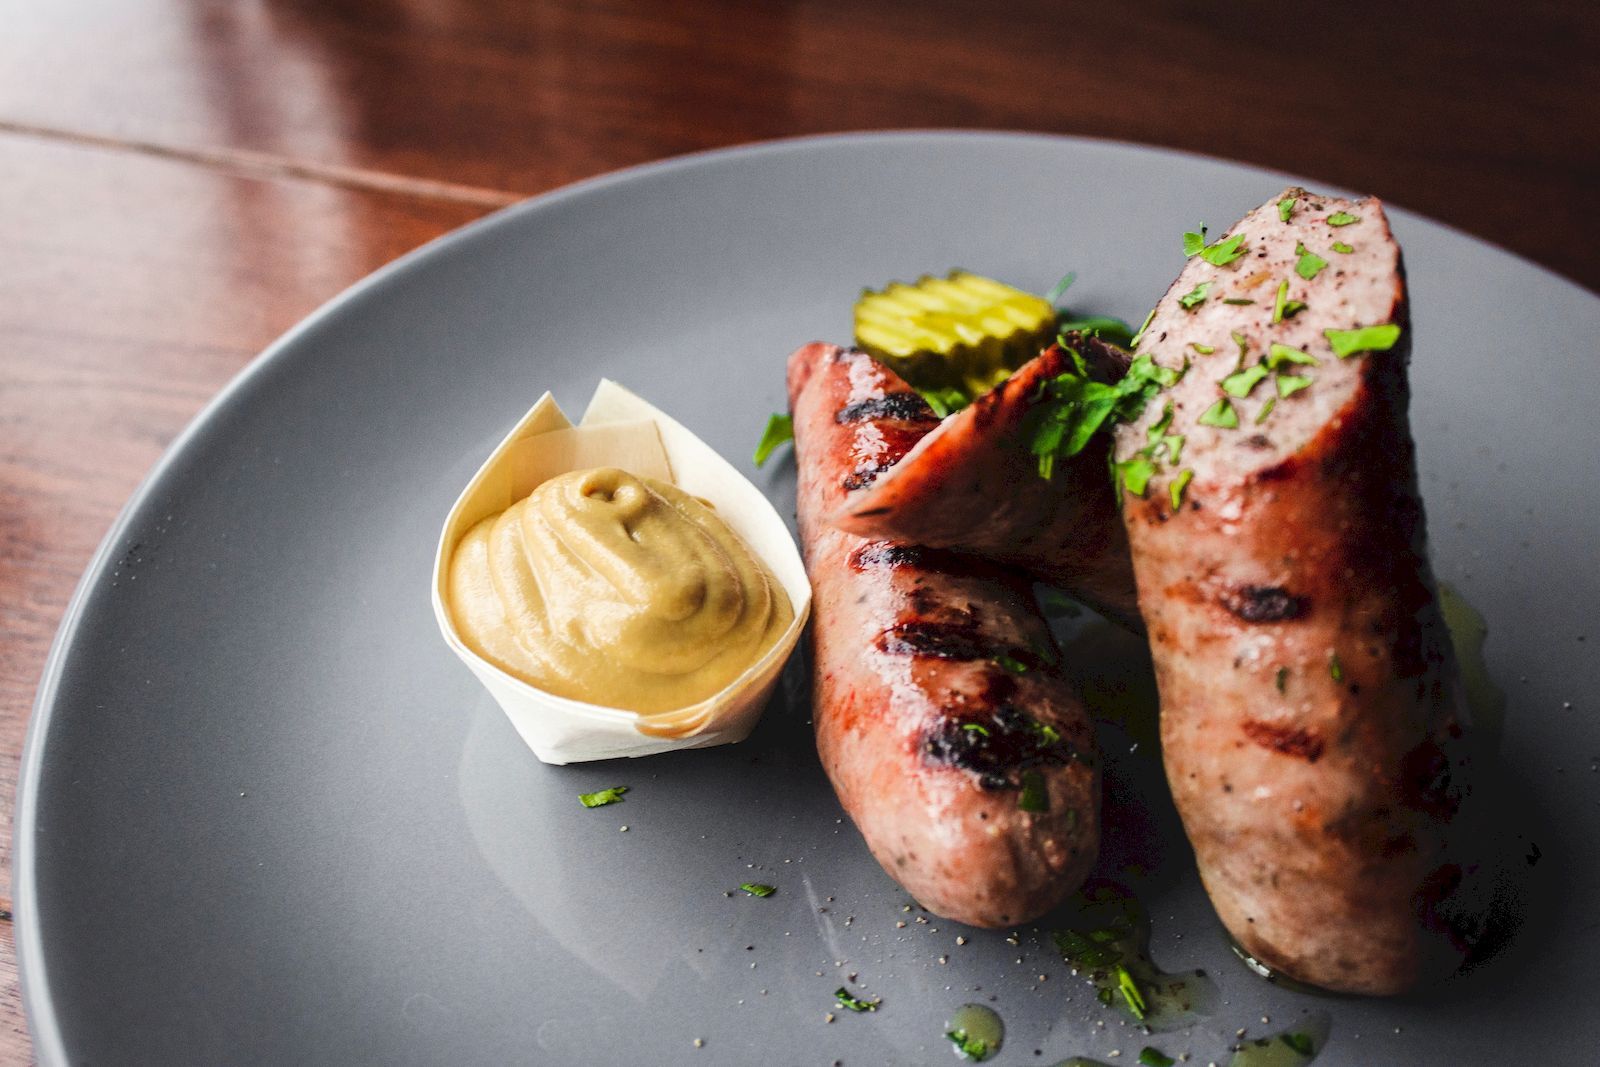 The future of food is here: Meat-free pork-style sausage